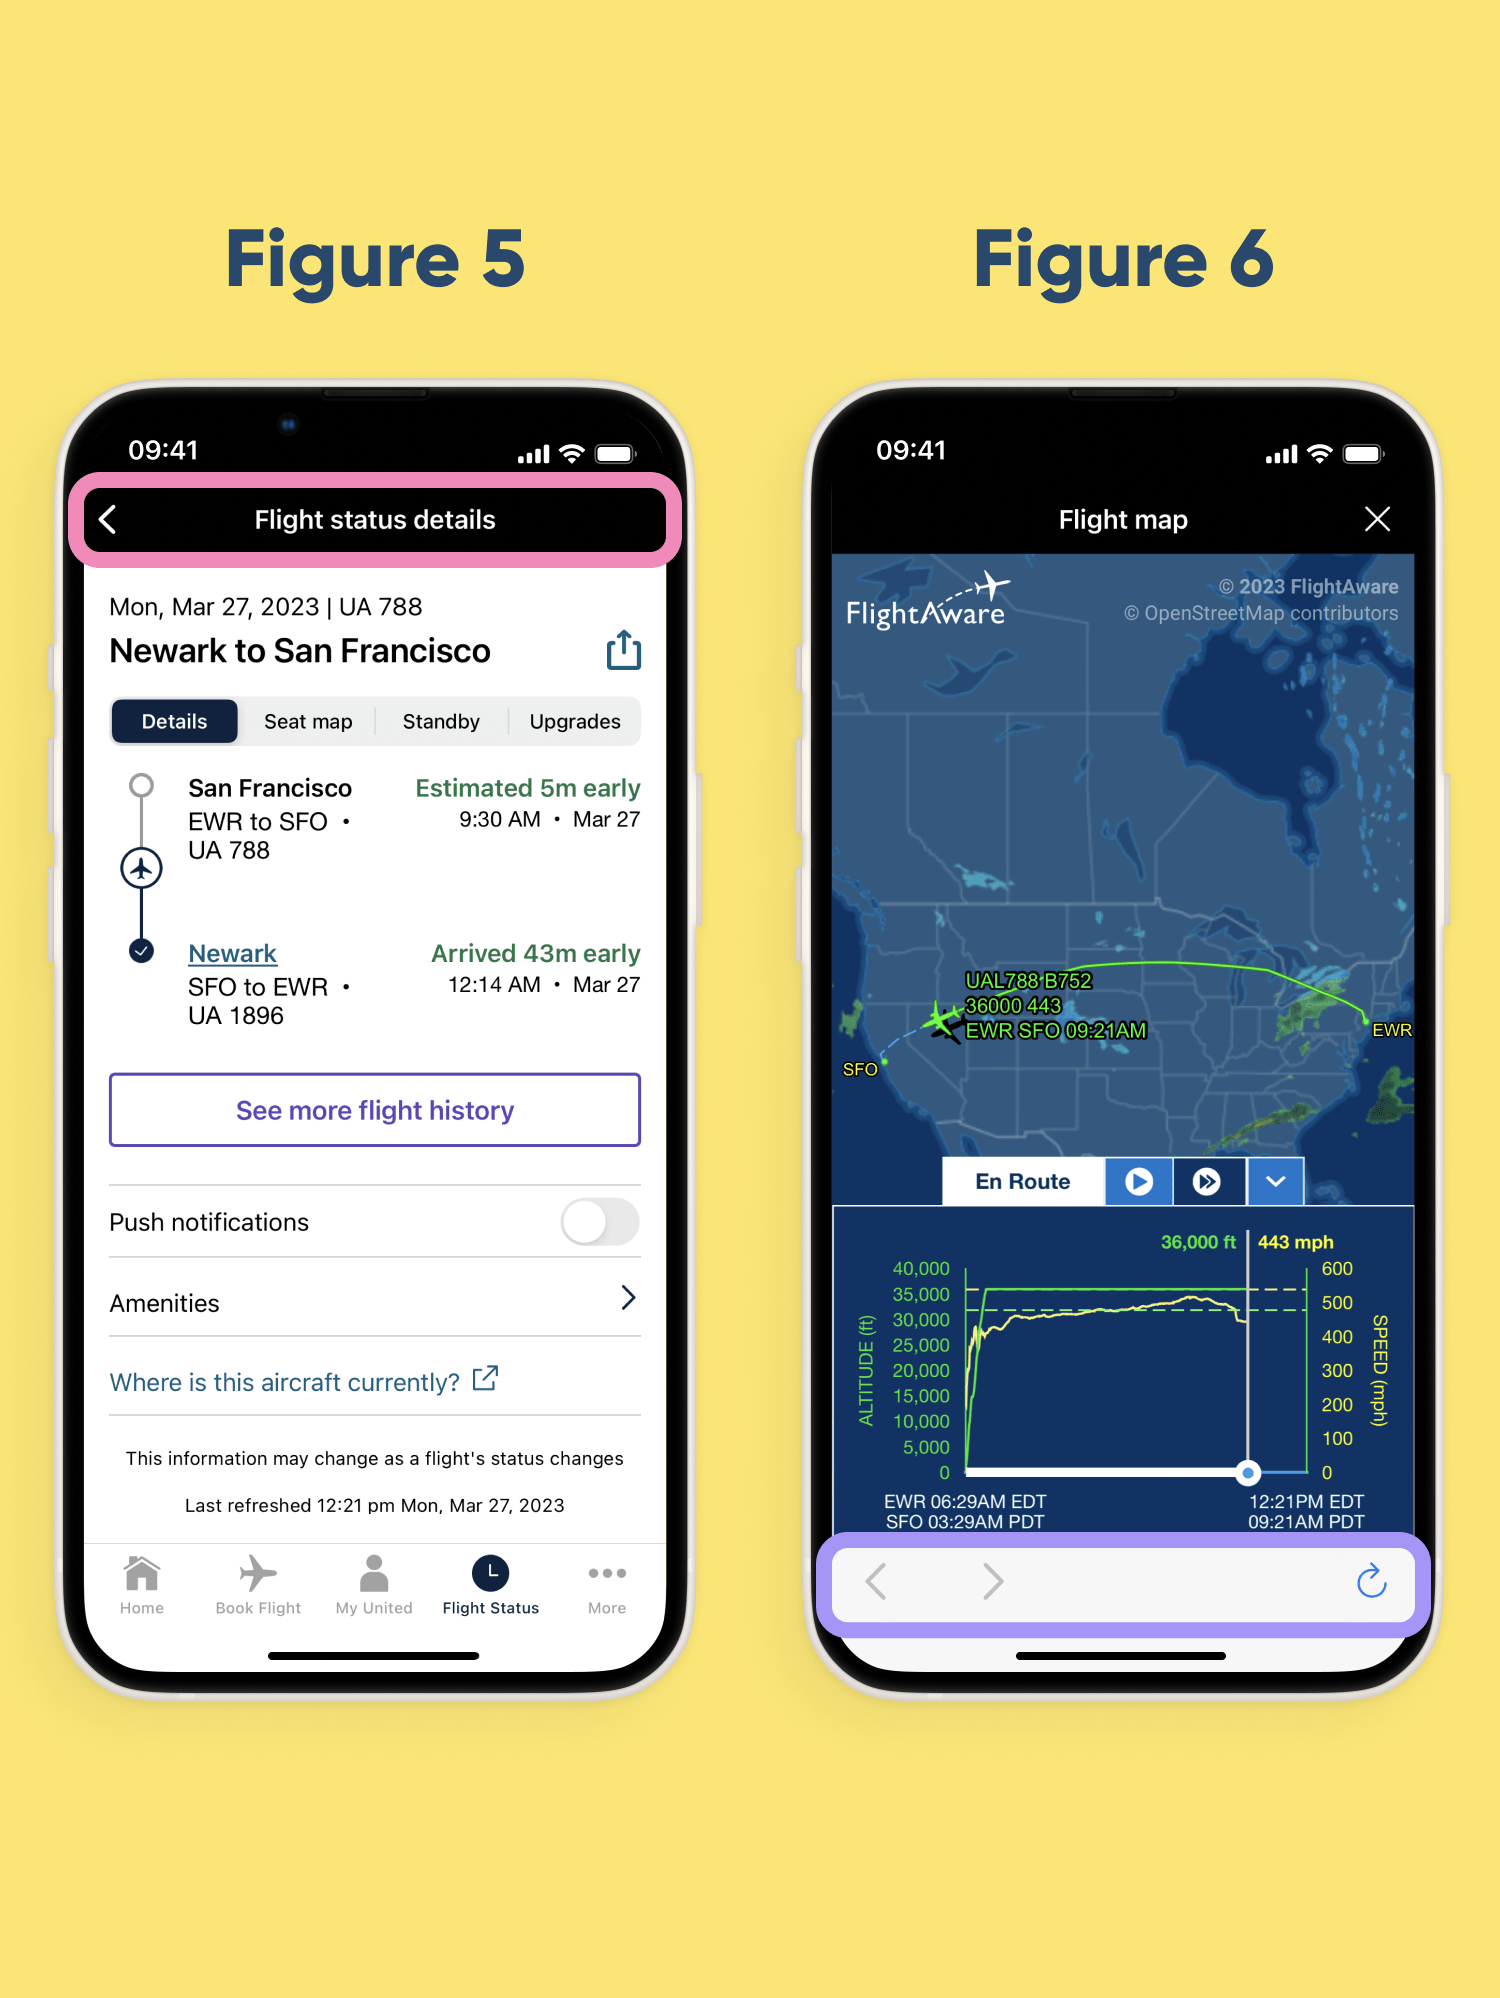 Two iphones, one showing flight information of a trip from Newark to San Fransisco, while the other shows flight details.